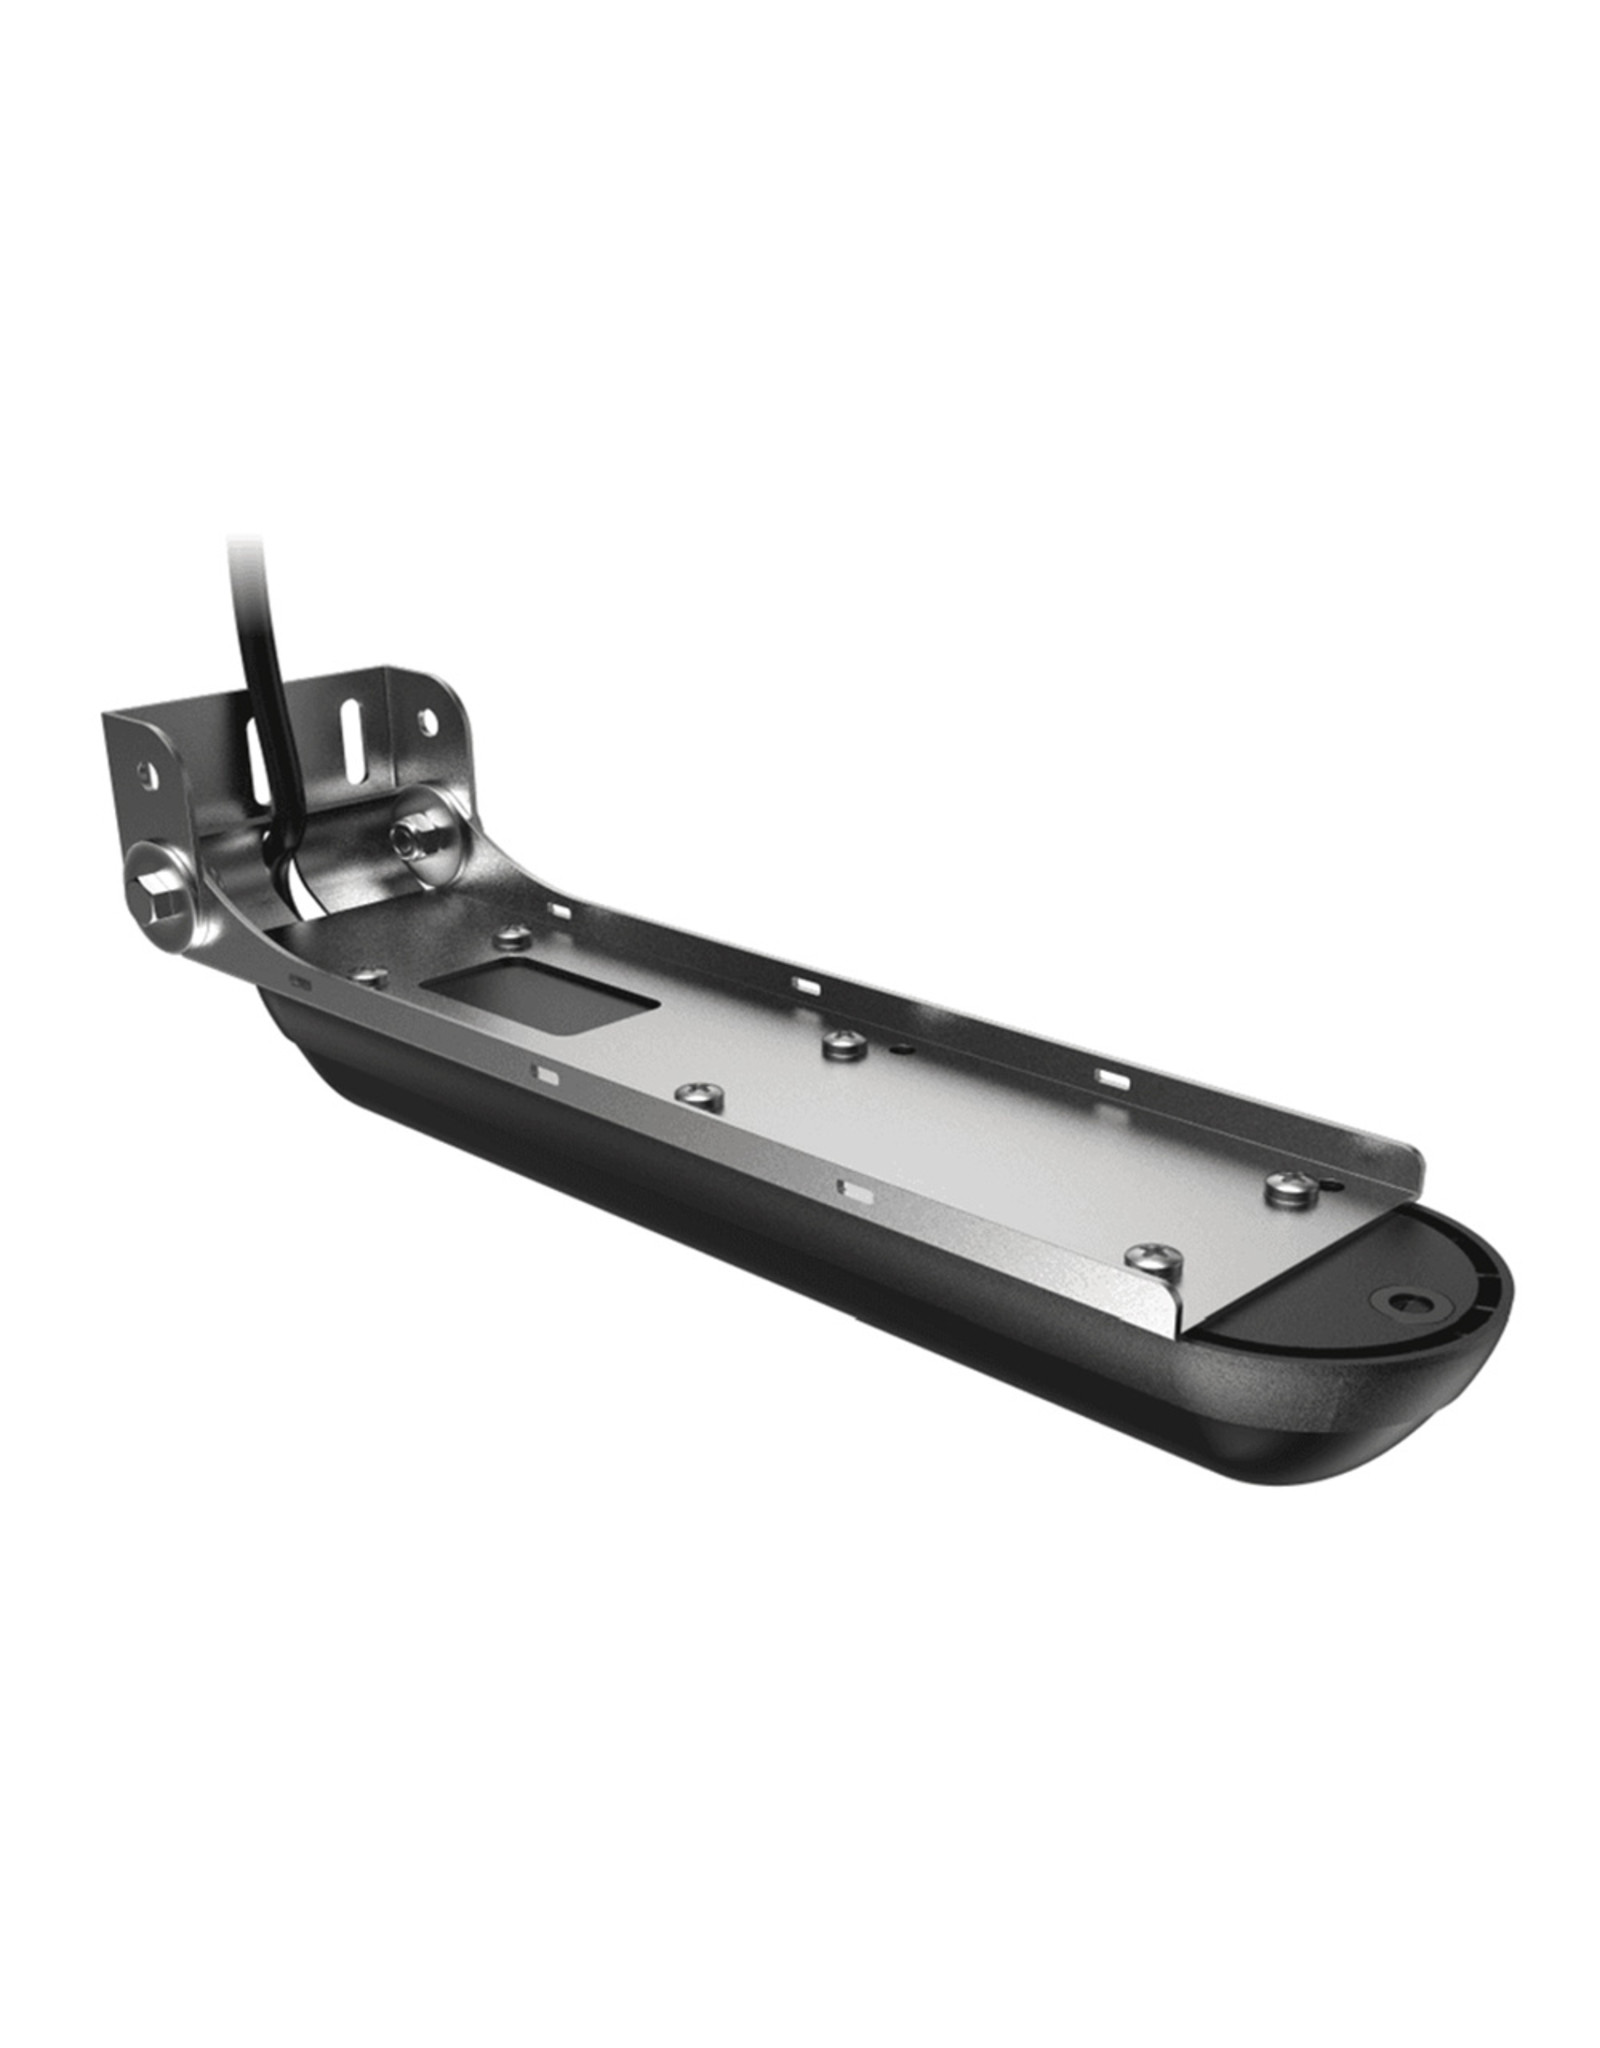 Lowrance Navico Active Imaging 2 in 1 Transducer